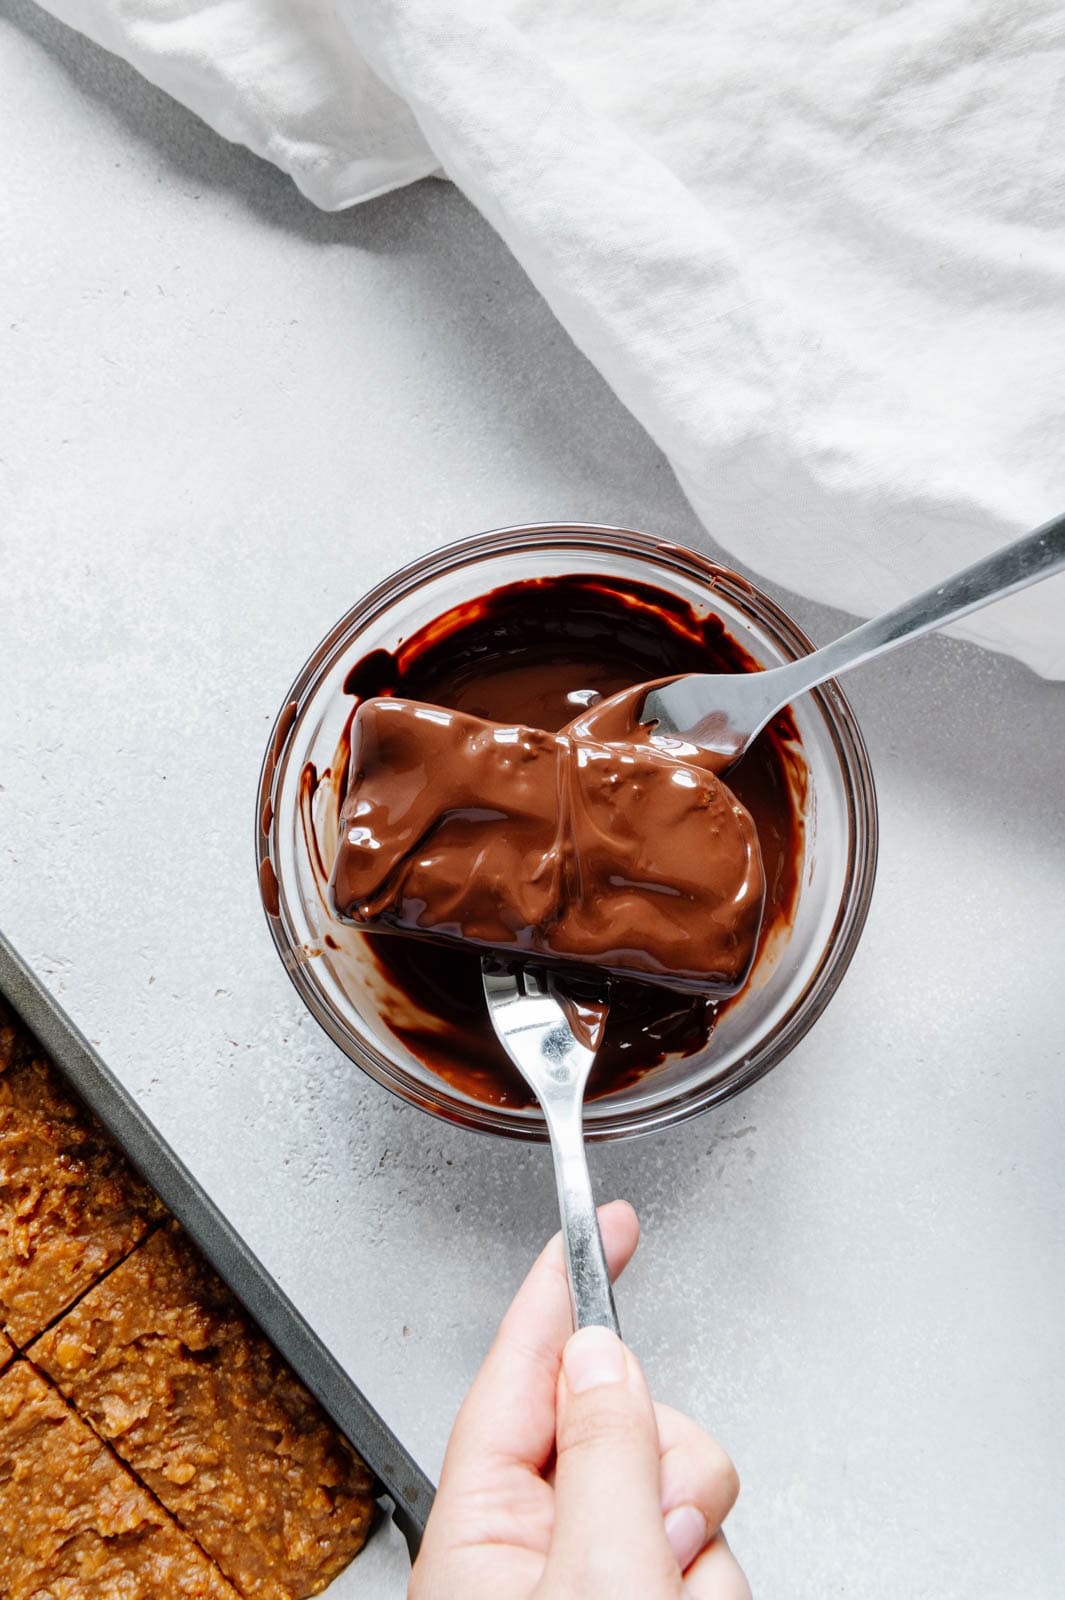 Two forks dipping a Butterfingers bar in melted chocolate.